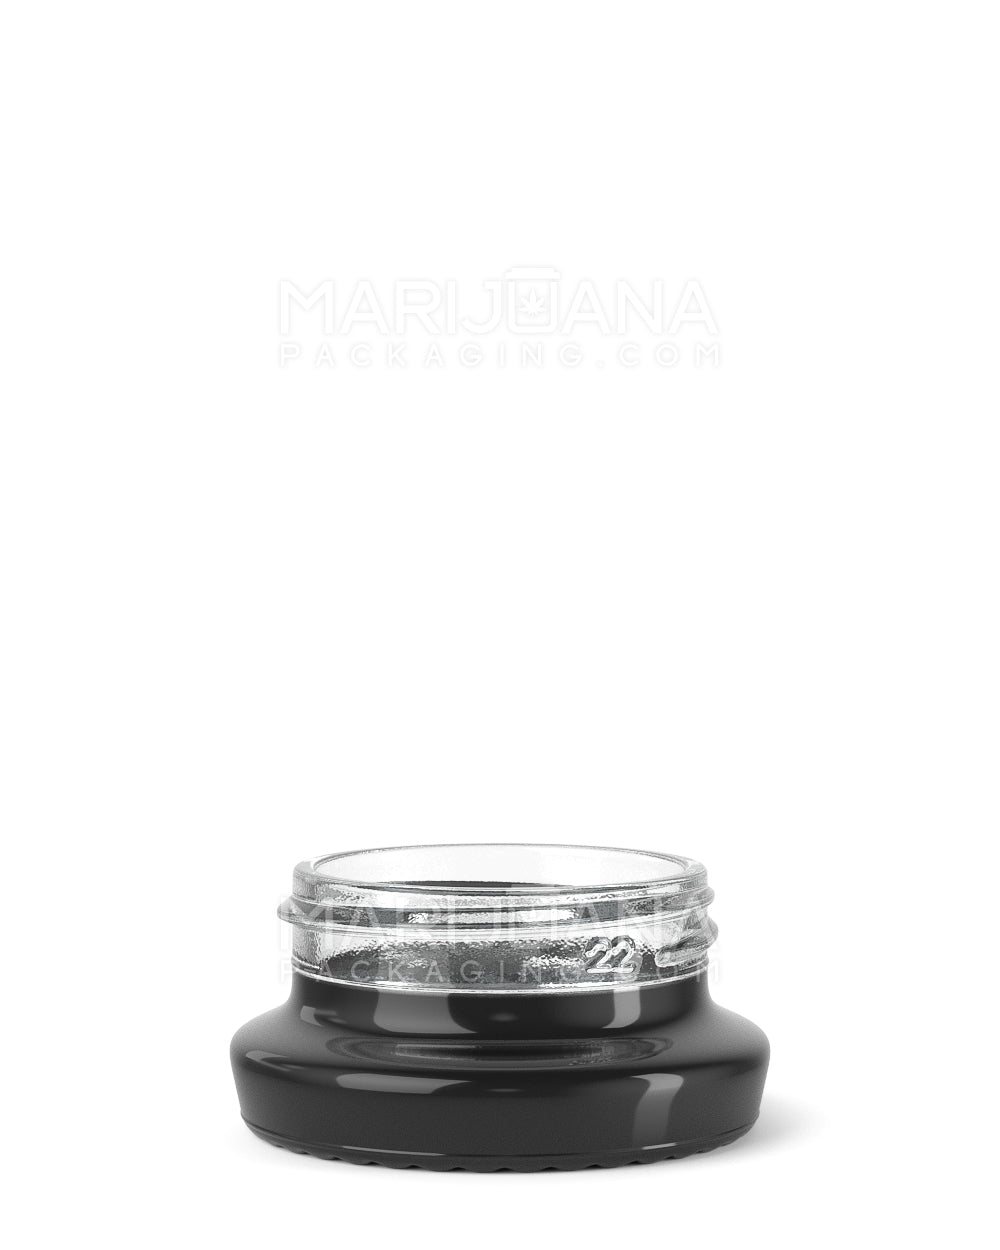 Black Glass Concentrate Containers w/ Silver Interior 38mm - 9mL - 240 Count | Sample